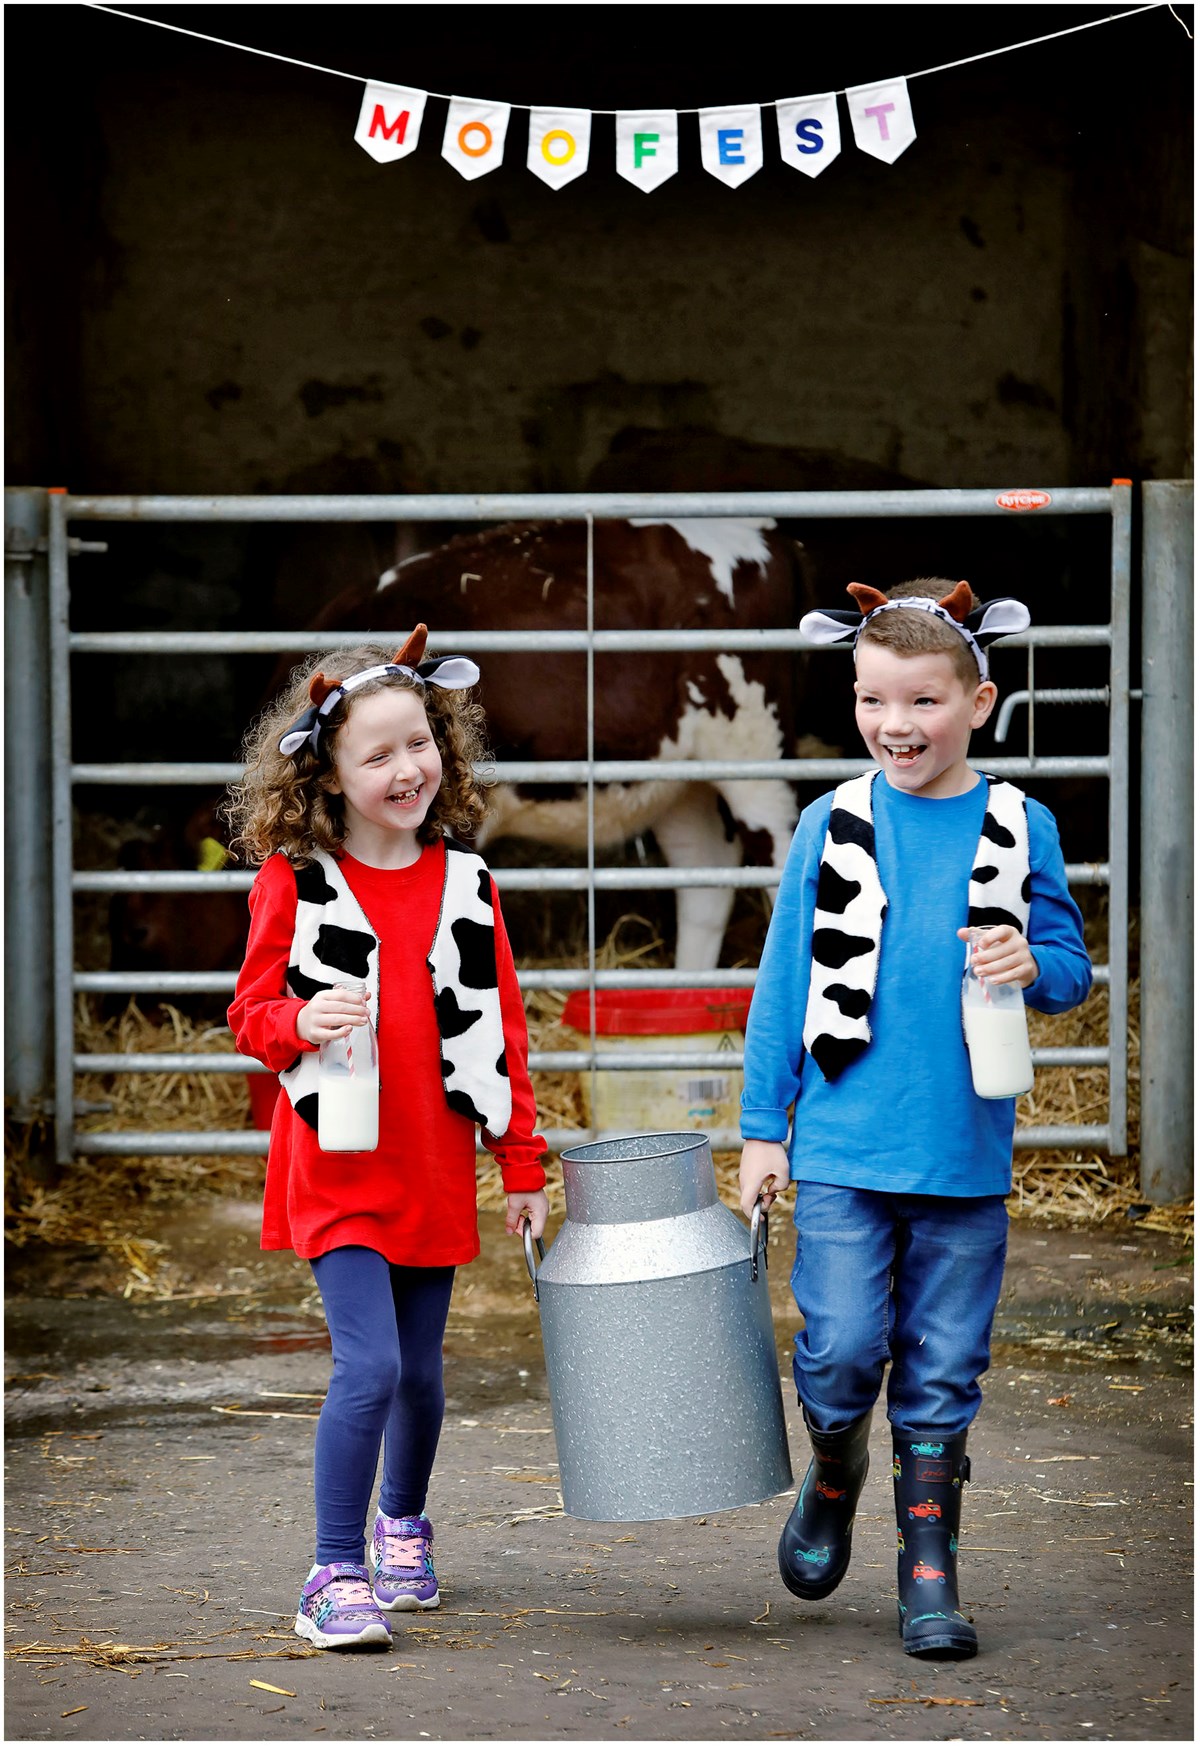 Emily Birrell and Harry Anderson from Mossneuk Primary get ready for MooFest at National Museum of Rural Life in East Kilbride this Saturday 16 and Sunday 17 September.  Supported by Players of People’s Postcode Lottery, the fun family event is a unique celebration of cattle featuring butterchurning workshops, demonstrations, trails, storytelling, crafts and food. Image credit: Paul Dodds.